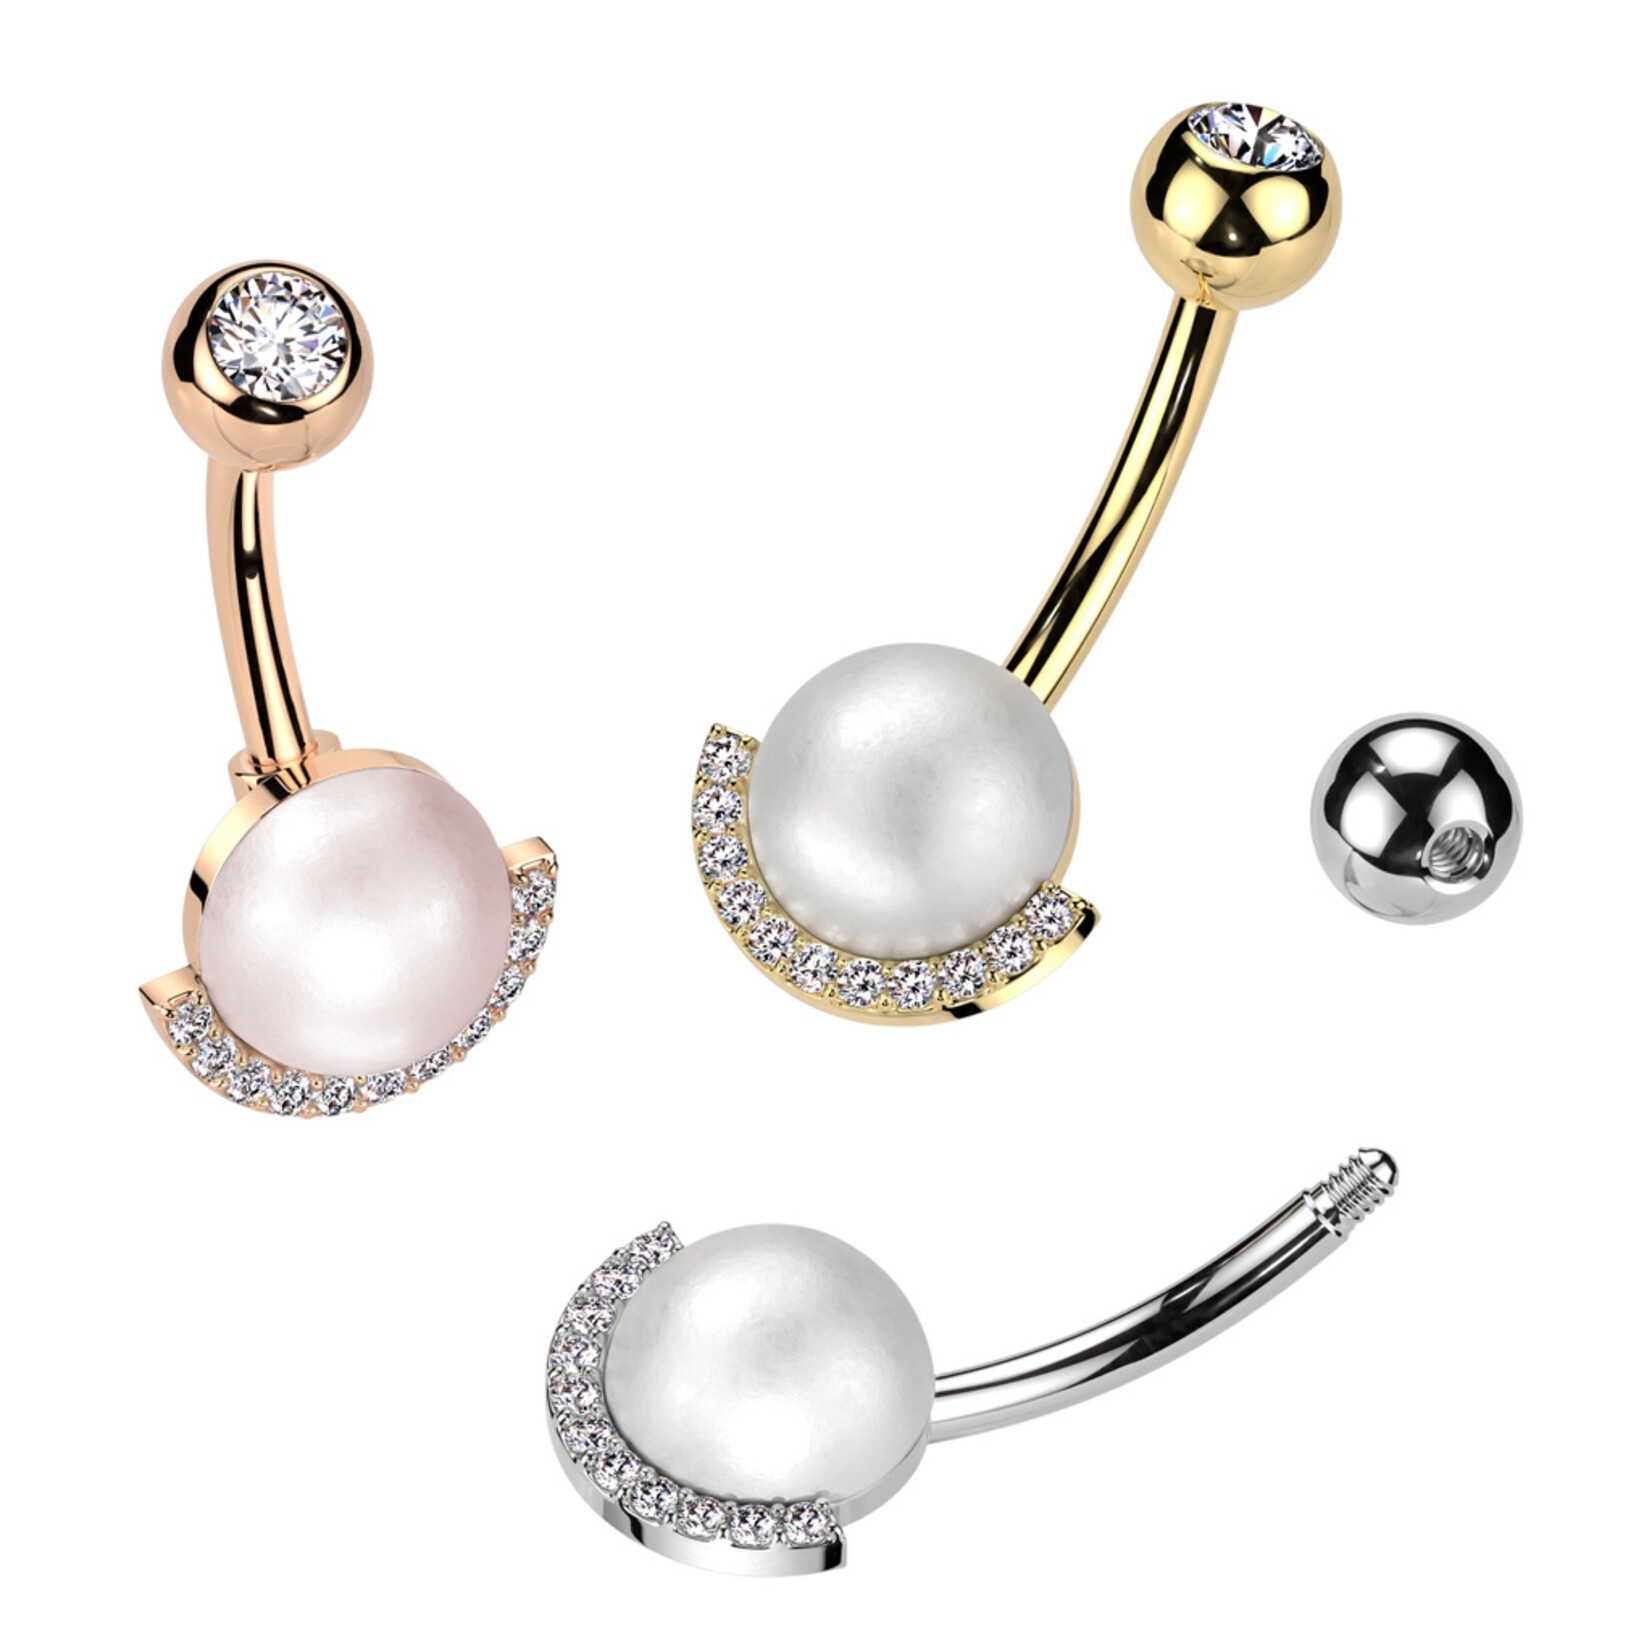 Hollywood Body Jewelry Pearl and Crystal Navel Rings